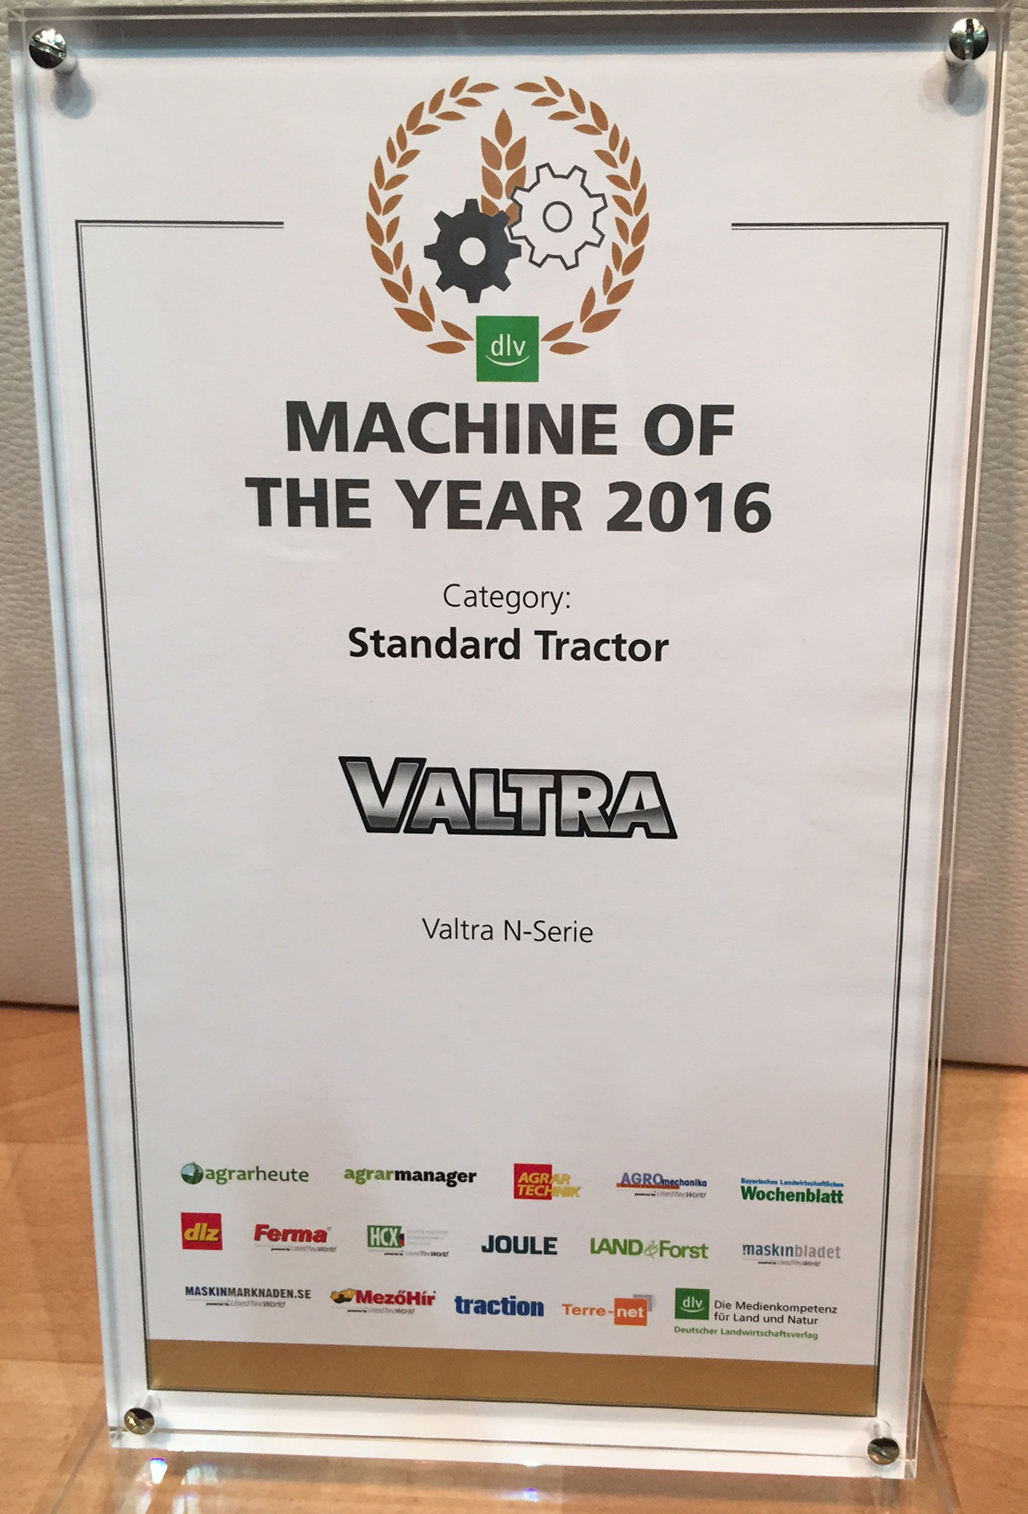 VALTRA Tractors N Series nommés Machine Of The Year 2016